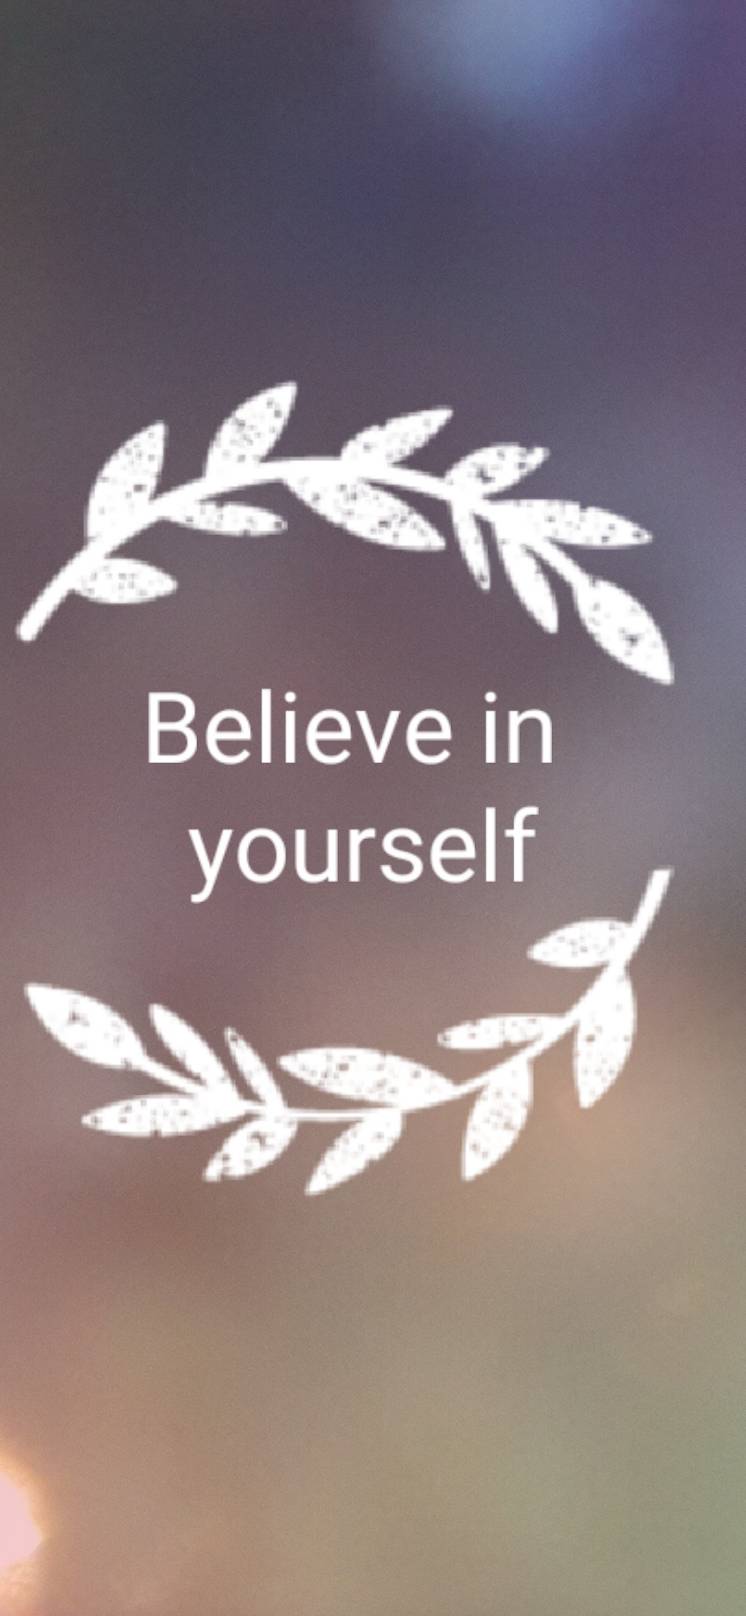 BE YOURSELF Wallpaper by Mojo Video  Inspirational wallpapers Wallpaper  iphone quotes Black wallpaper iphone